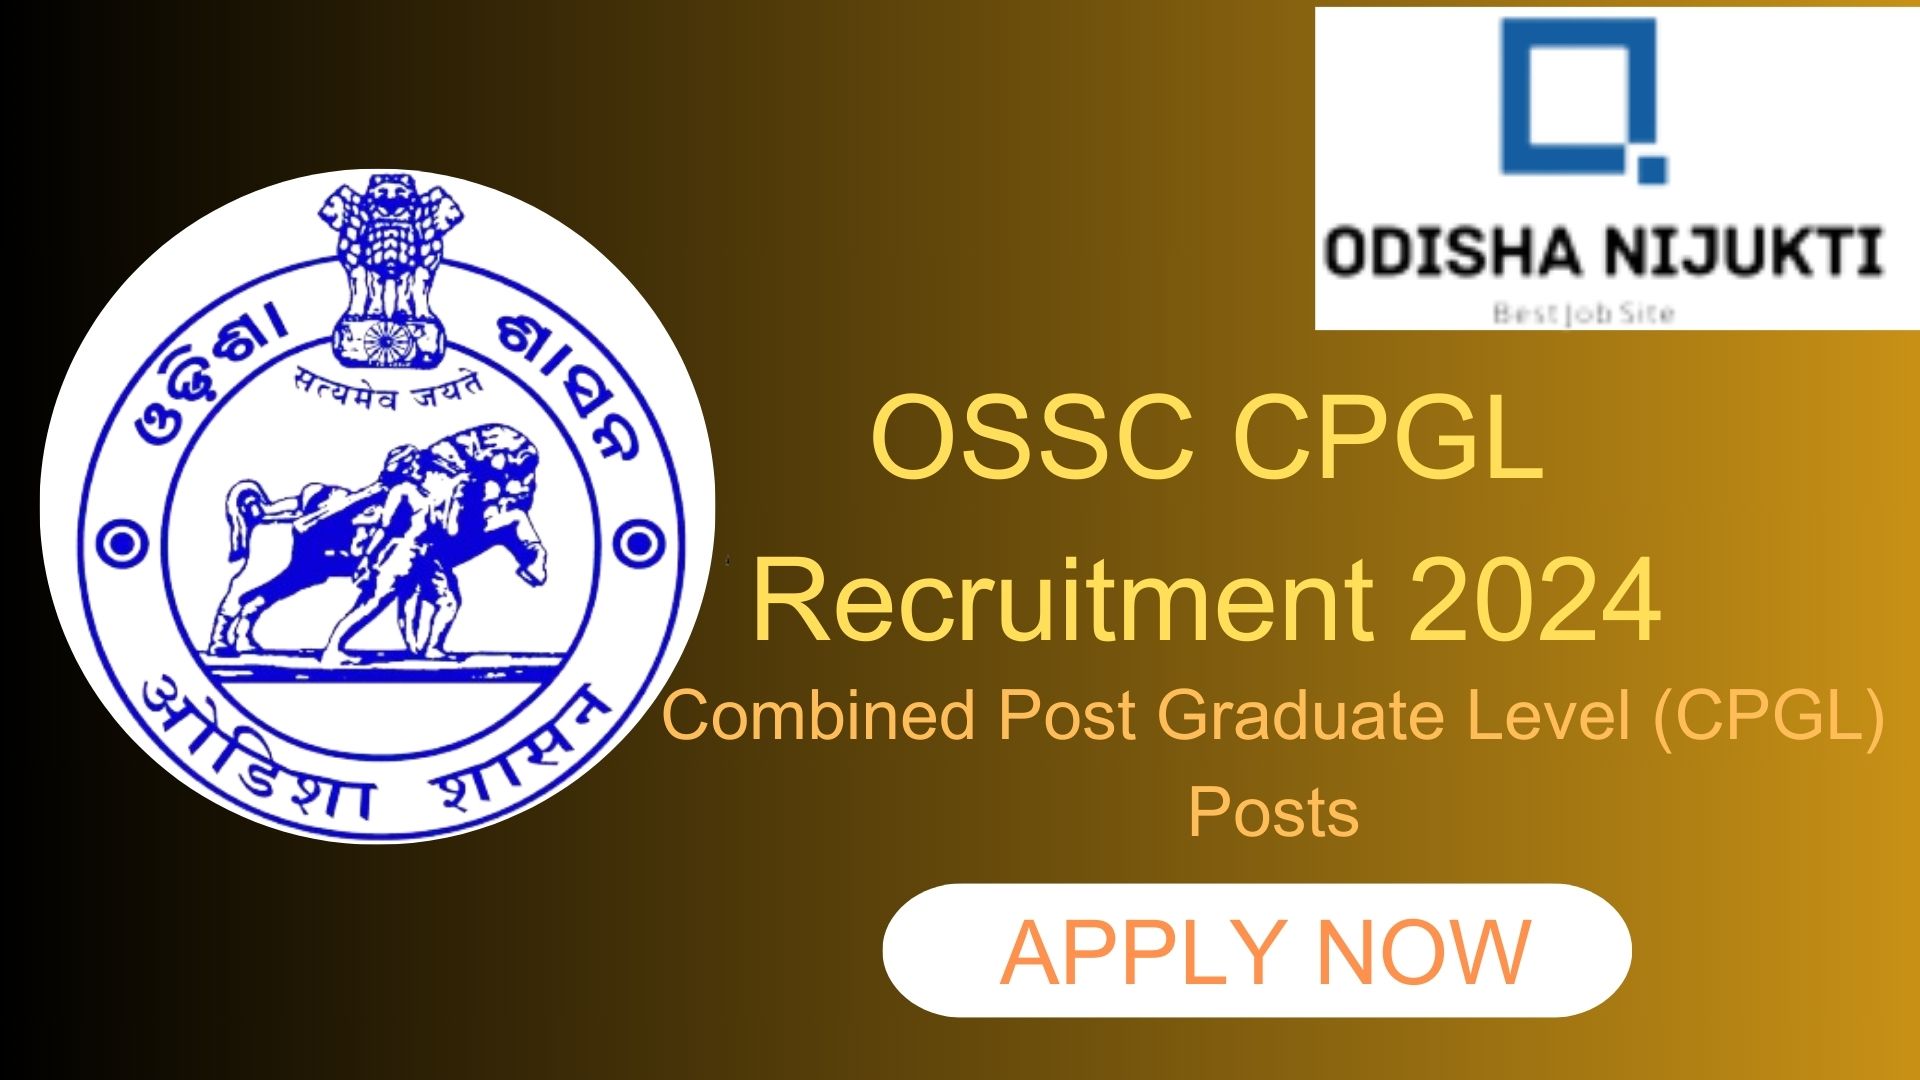 OSSC-CPGL-Recruitment-2024-for-Combined-Post-Graduate-Level-(CPGL)-Posts-